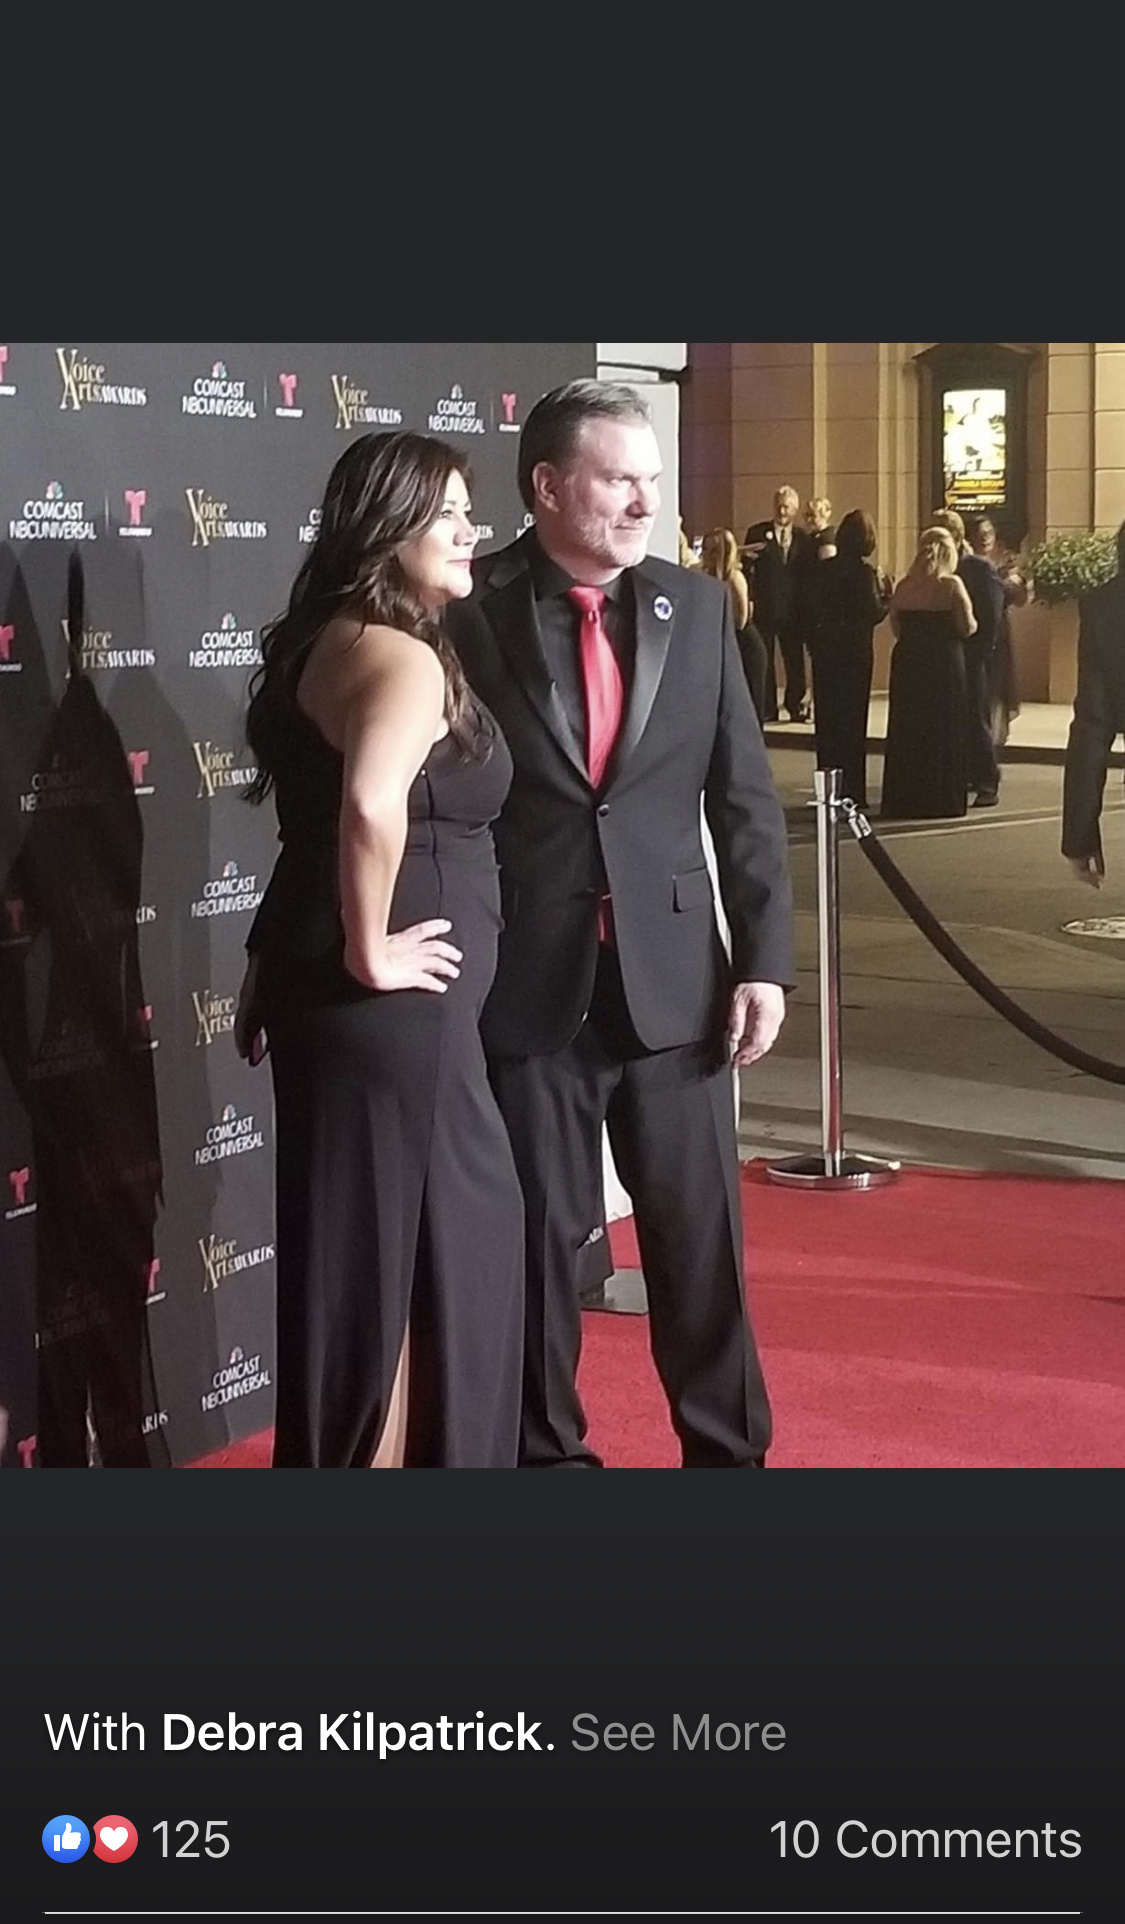 Kevin and his wife Debra Kilpatrick rockin’ it on the red carpet before the SOVAS 2019.